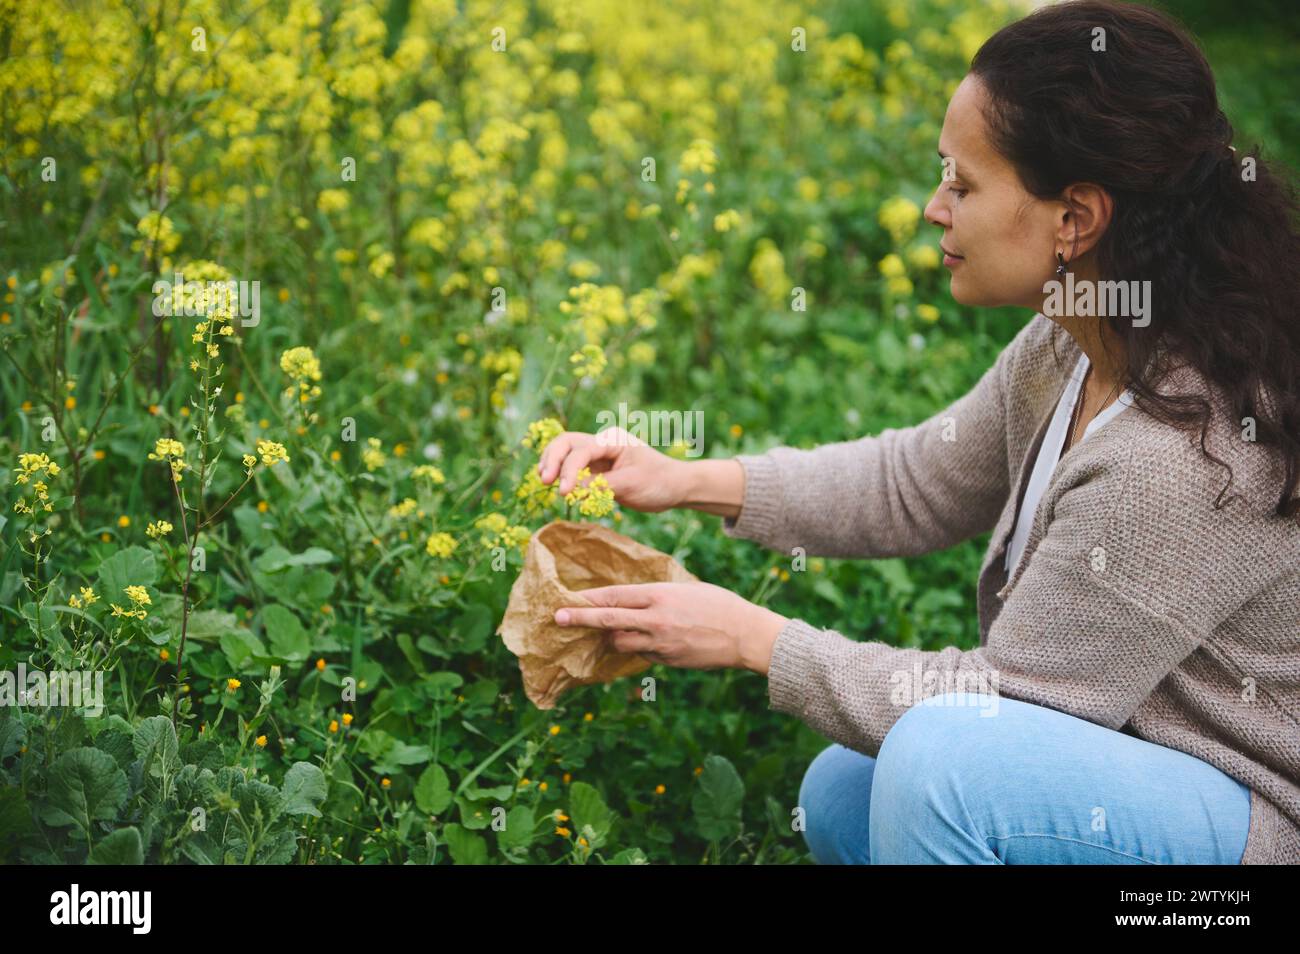 Relaxed happy woman herbalist, botanist pharmacist picking organic medicinal herbs and flowers in eco friendly meadow outdoors, for preparing deliciou Stock Photo